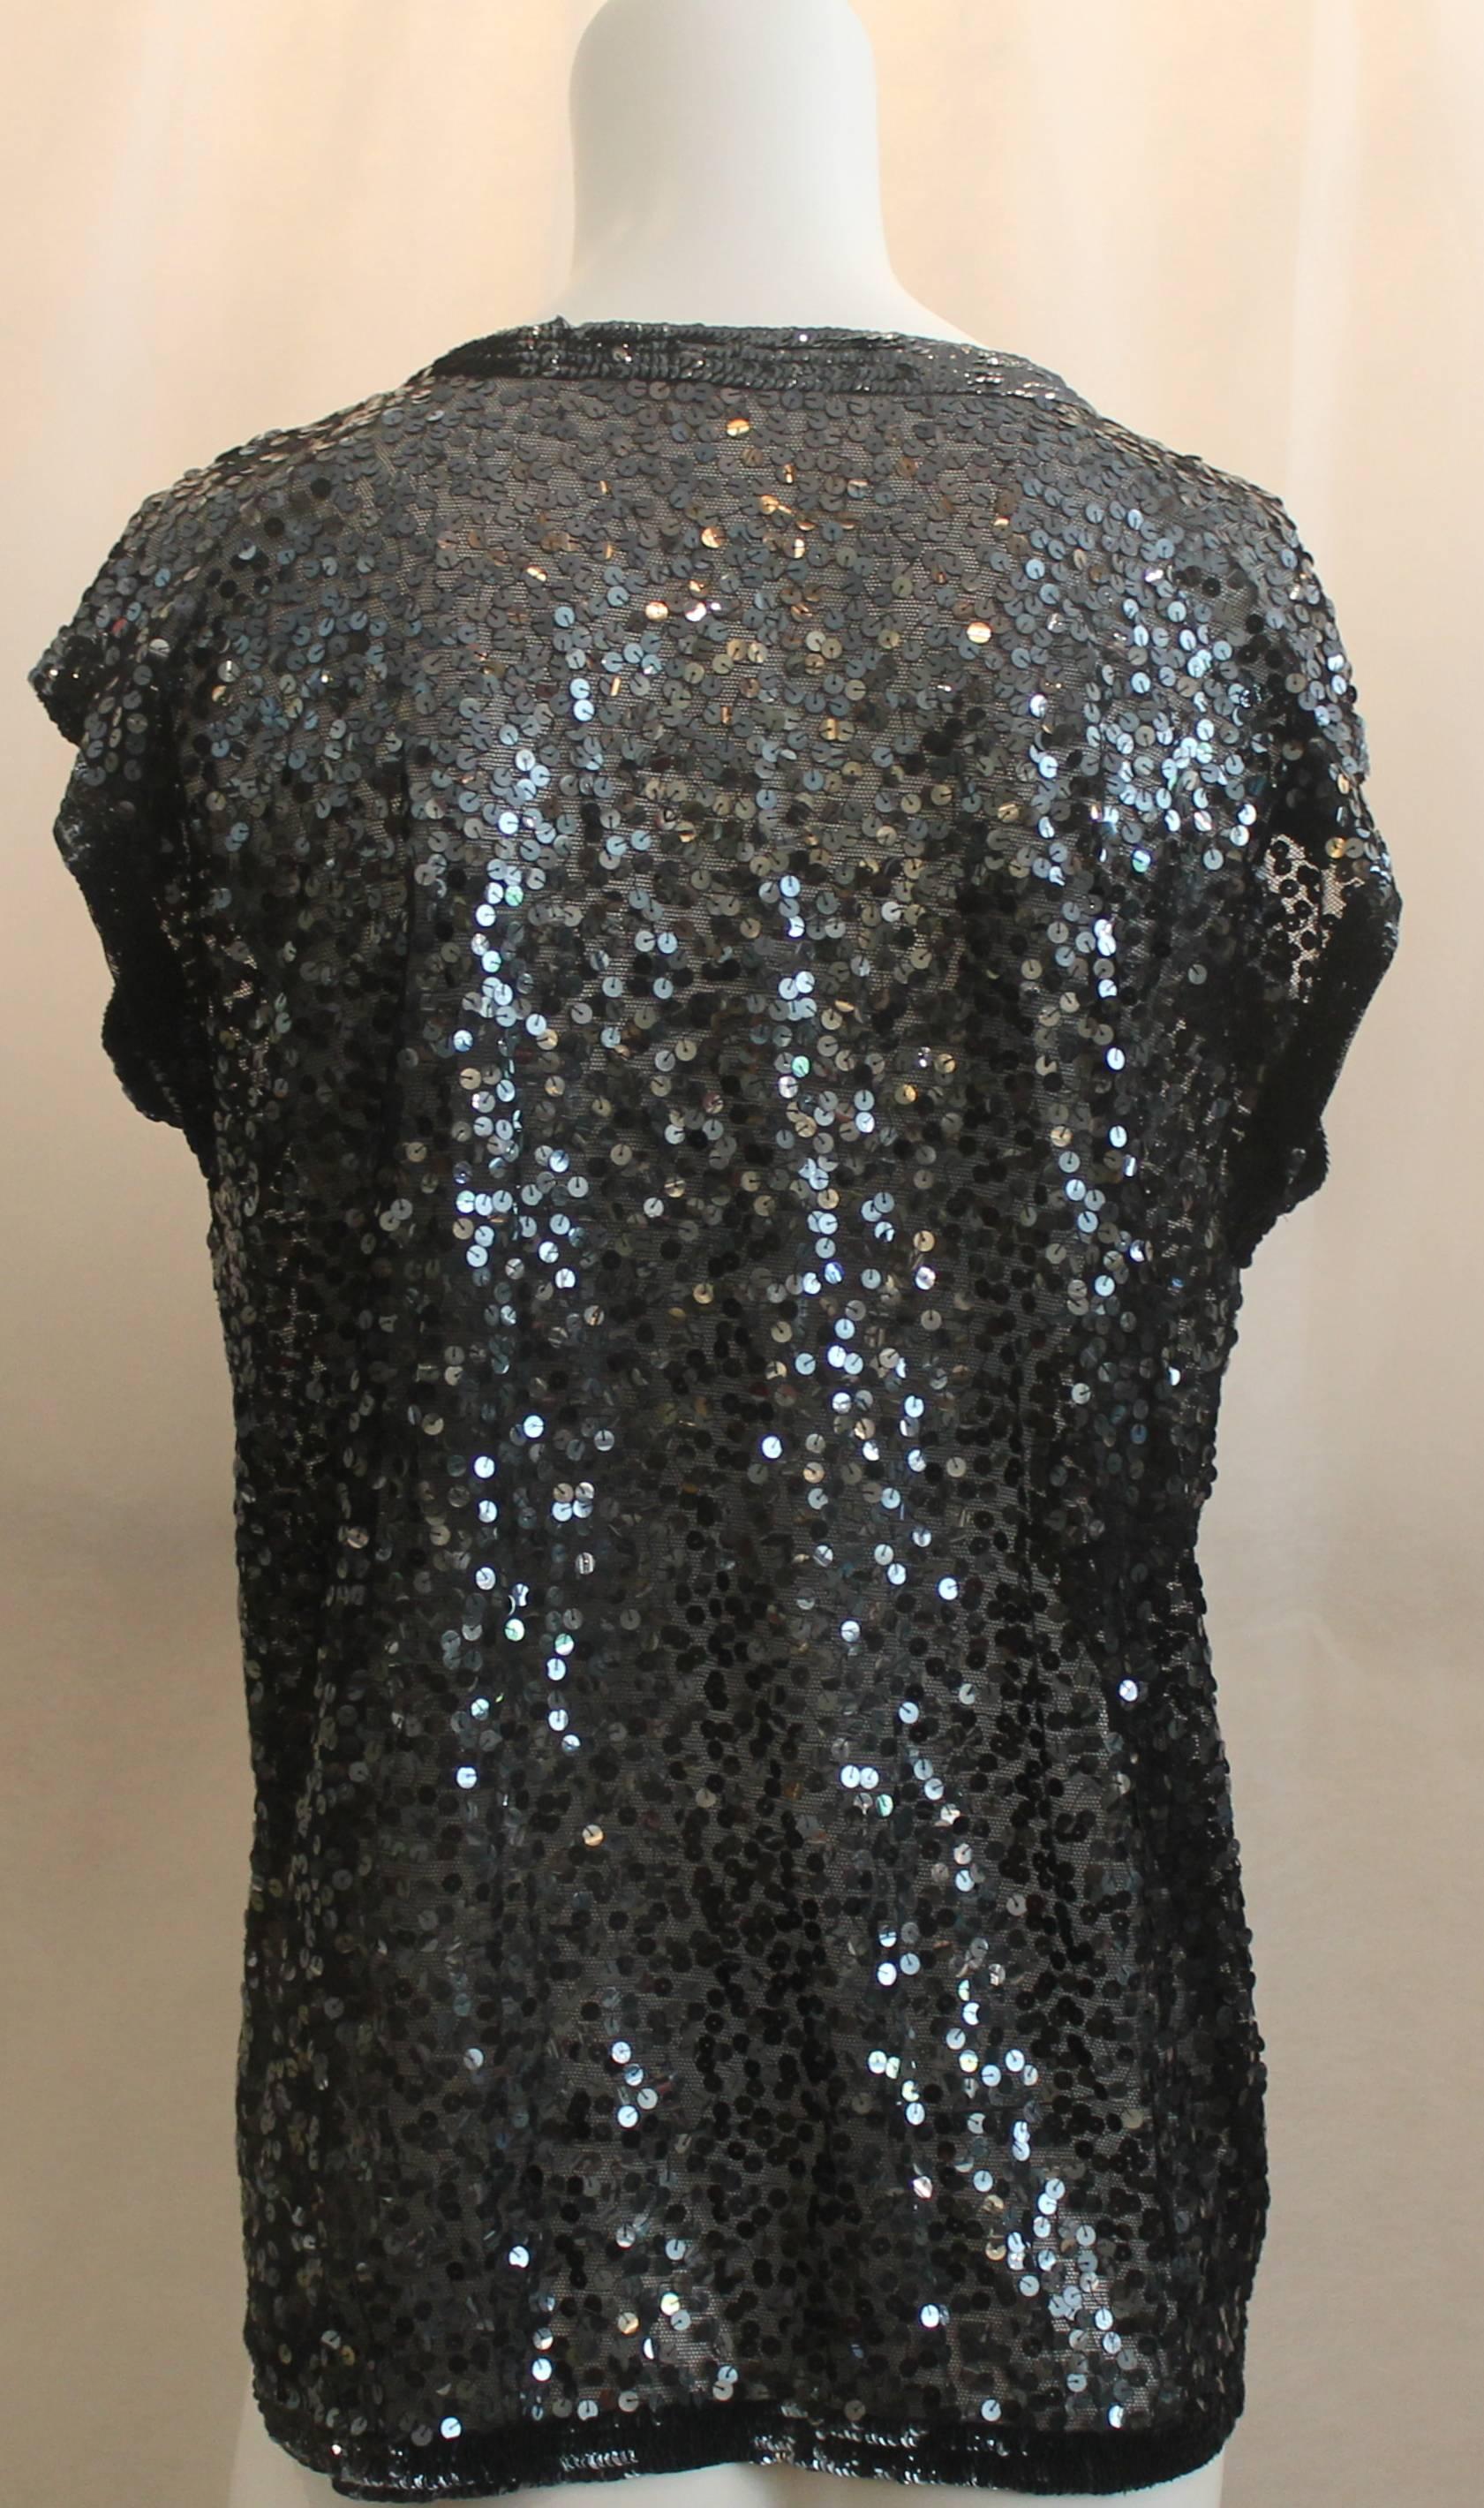 Zoran Black Sequin Short Sleeve Sweater - Medium. This sequined short sleeve sweater is completely covered in sequins. The trim is also sequined but the sequins are closer together. The fabric under the sequins is net-like and there is no closure.